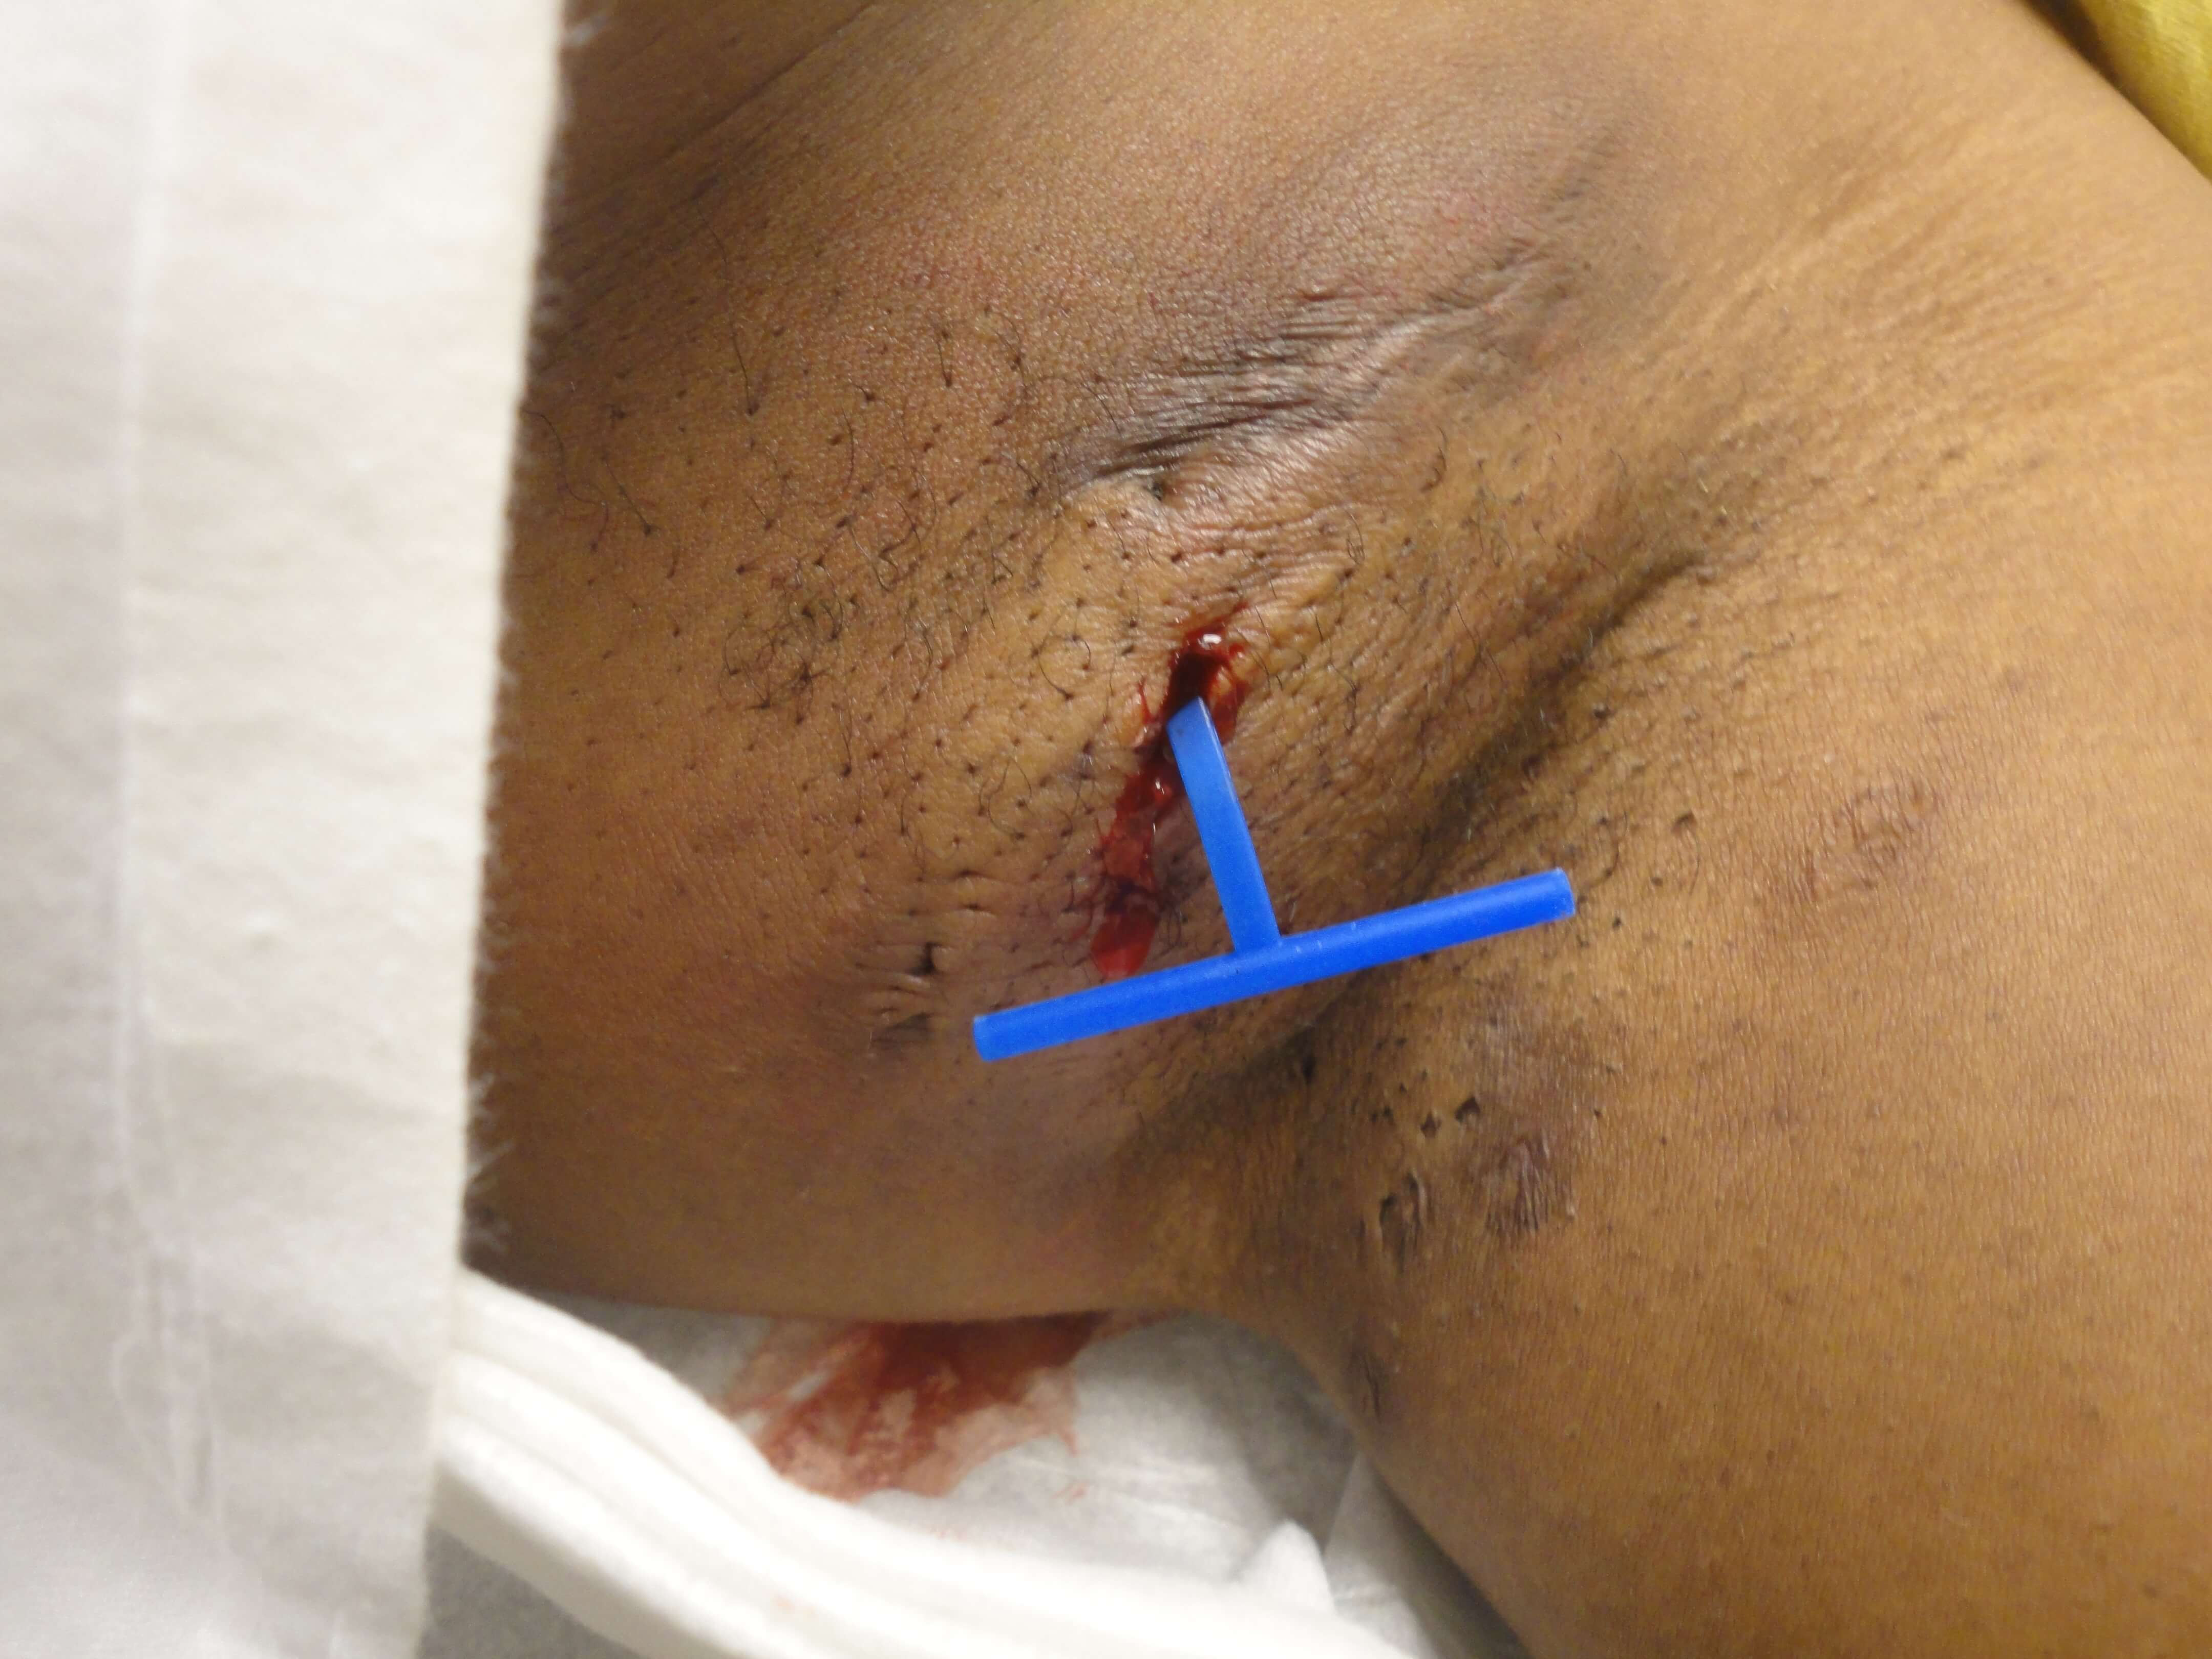 Derma-Stent being used with one incision on the abscess.